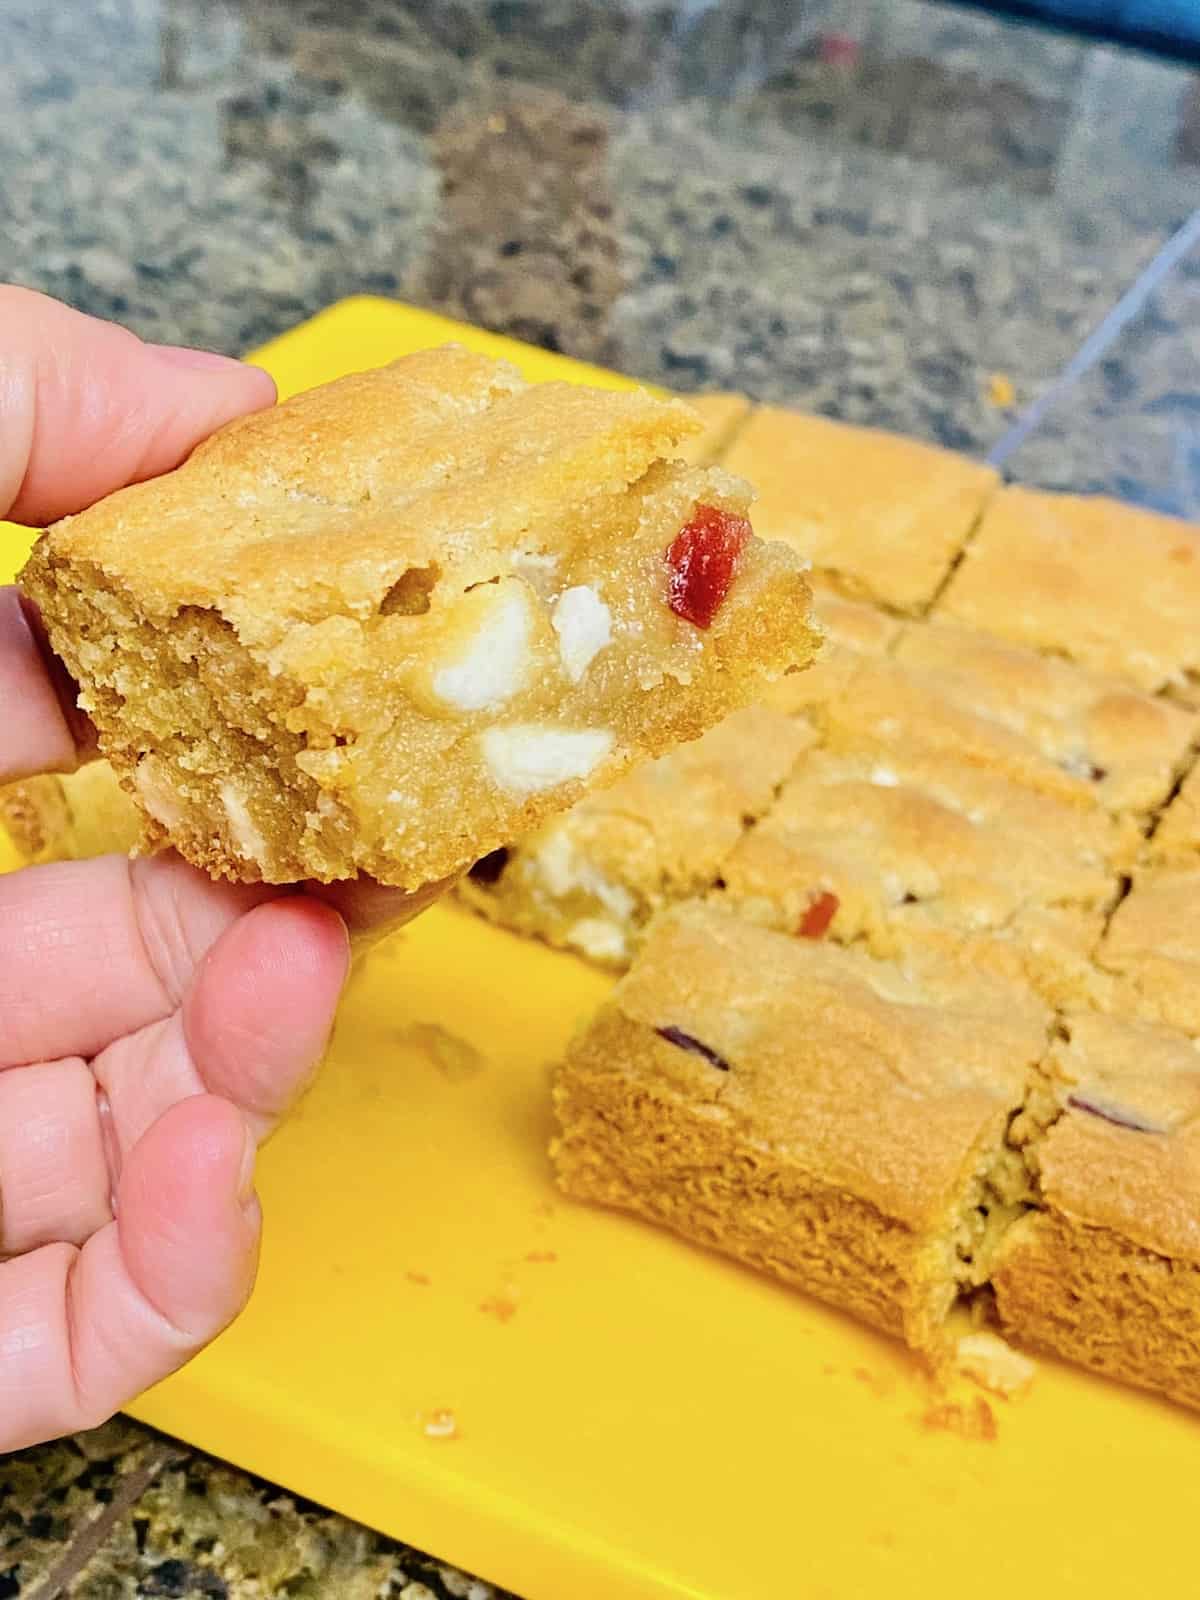 Strawberries & Cream Cookie Bars Cookies cut into squares on a cutting board and hand holding one close up to show the white chocolate chips and strawberries pieces inside.